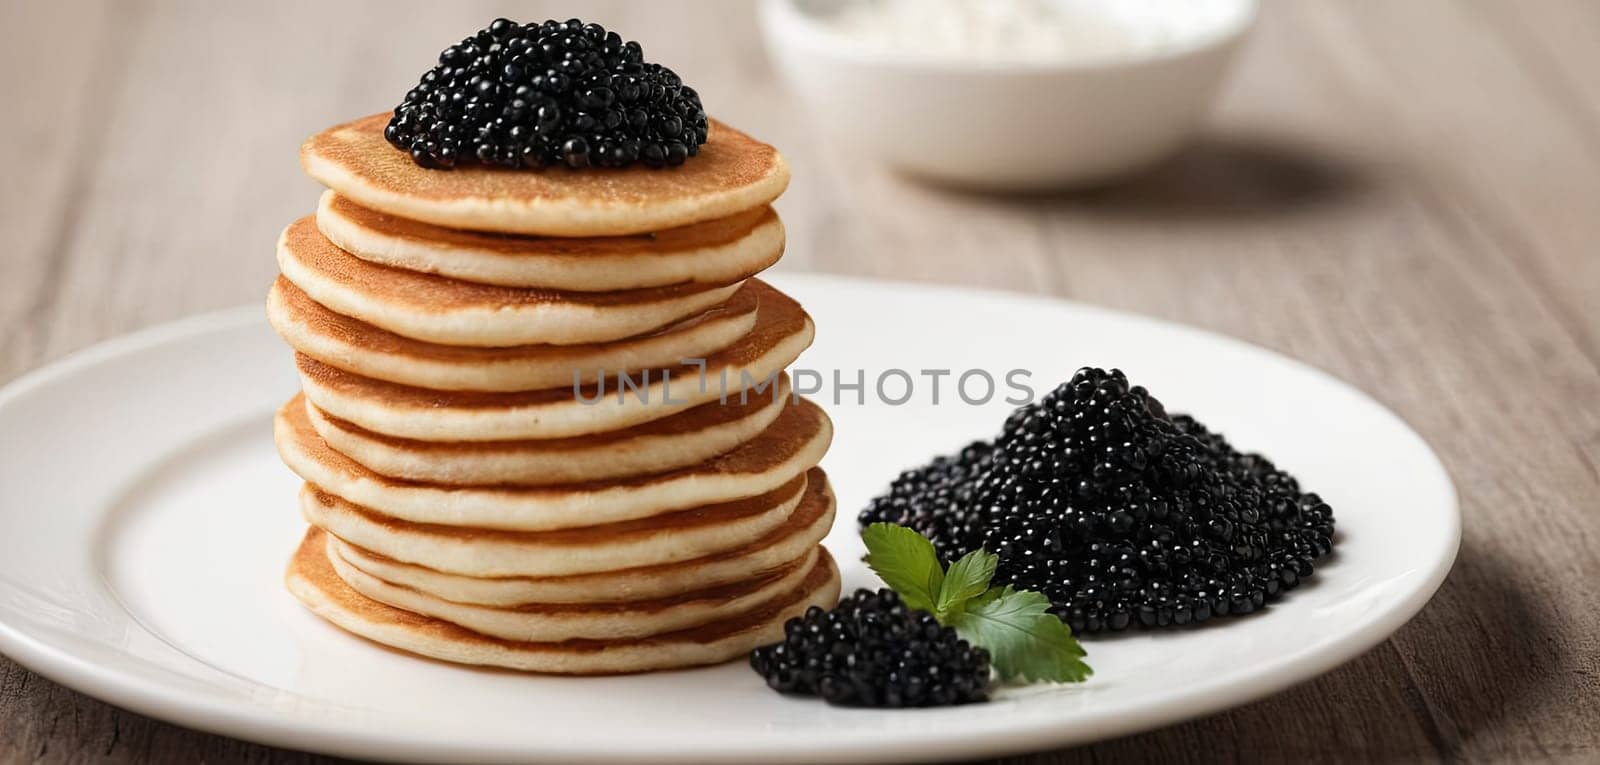 Pancakes with caviar for breakfast highlight luxury morning meal. Golden stack topped with black caviar by panophotograph